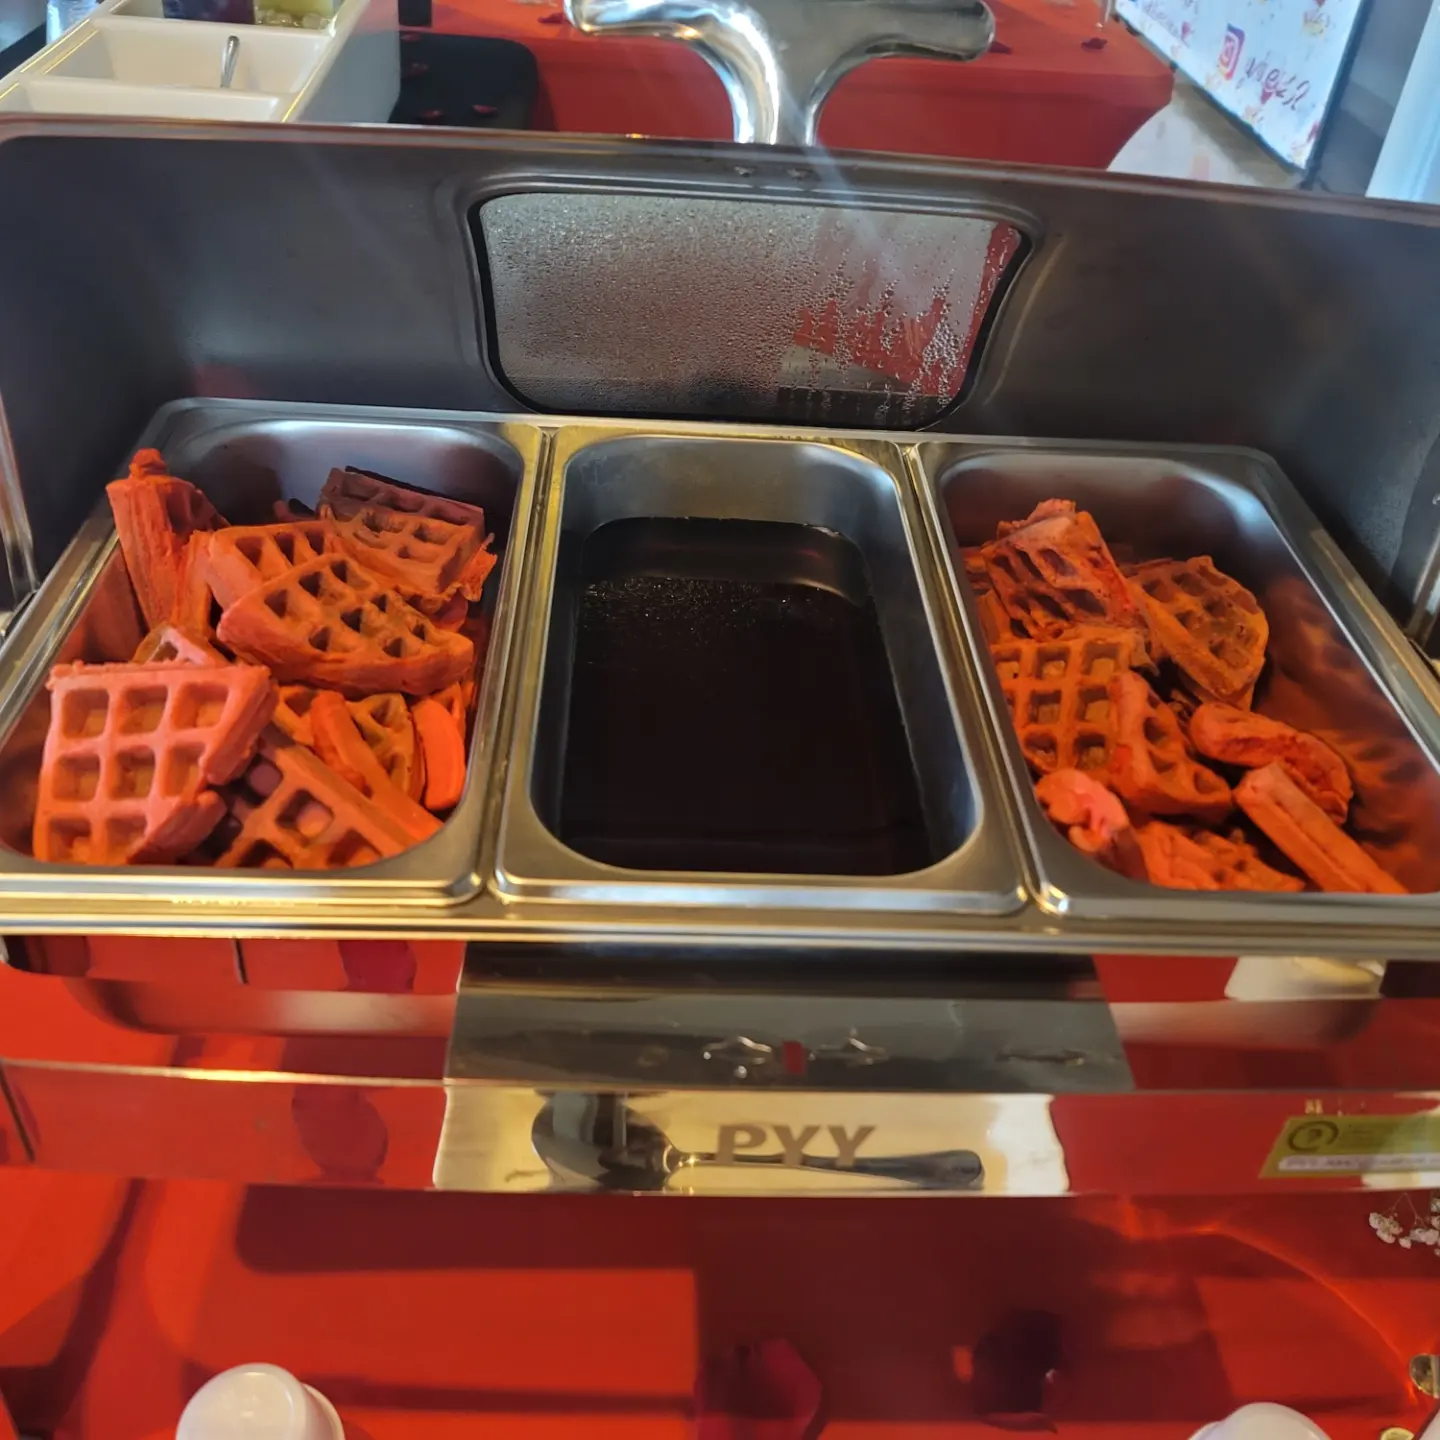 A large metal tray filled with orange colored food.